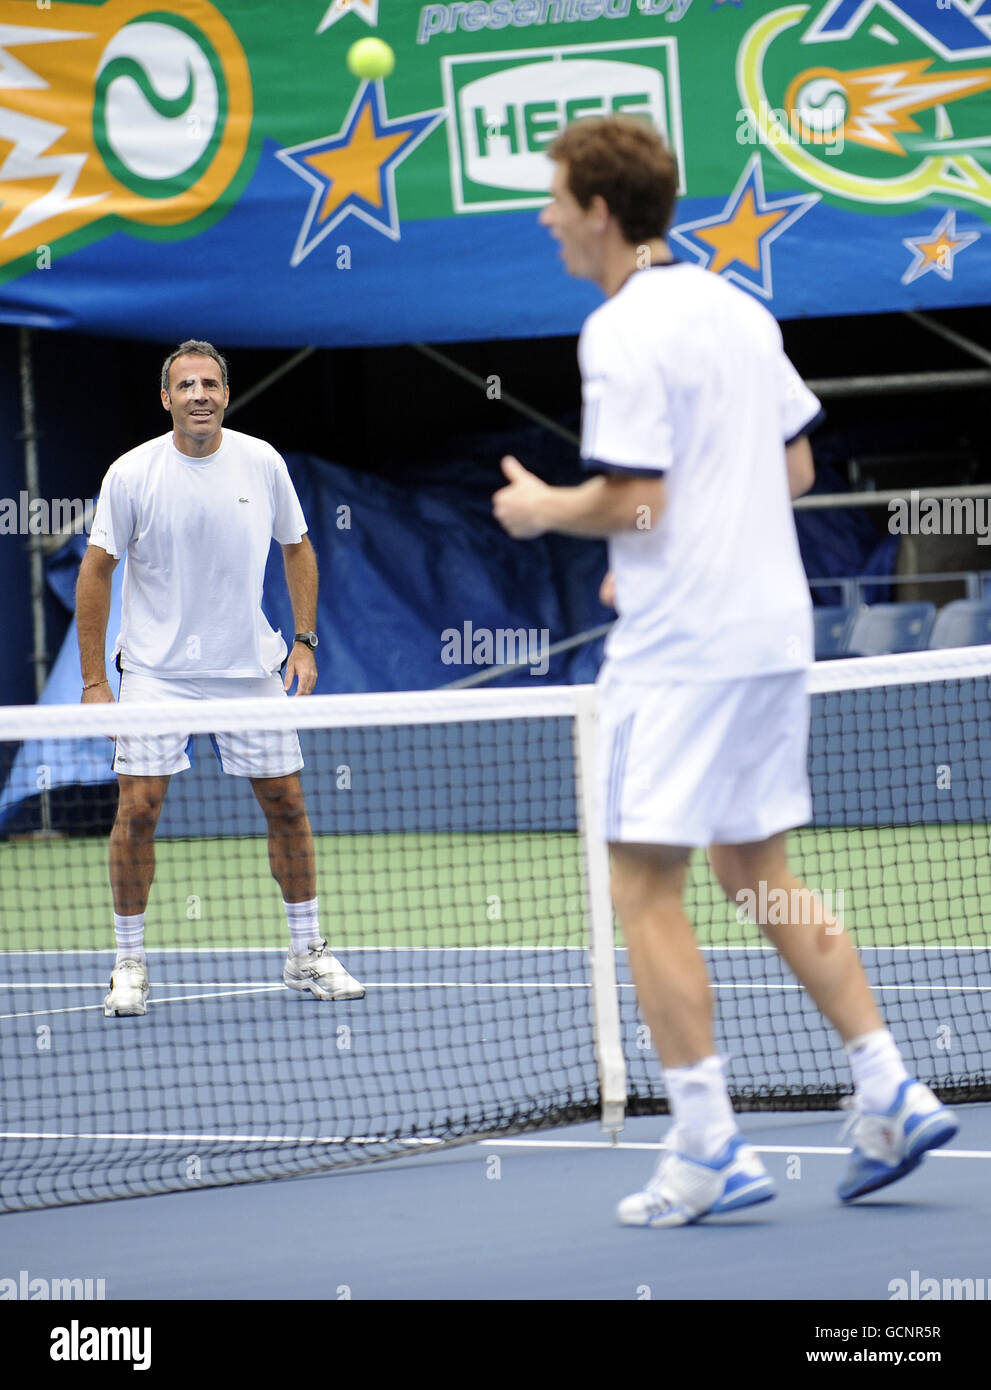 Andy Murray and Spanish coach Alex Corretja (left) during a practice session at Flushing Meadows prior to the US Open 2010 in New York City Stock Photo